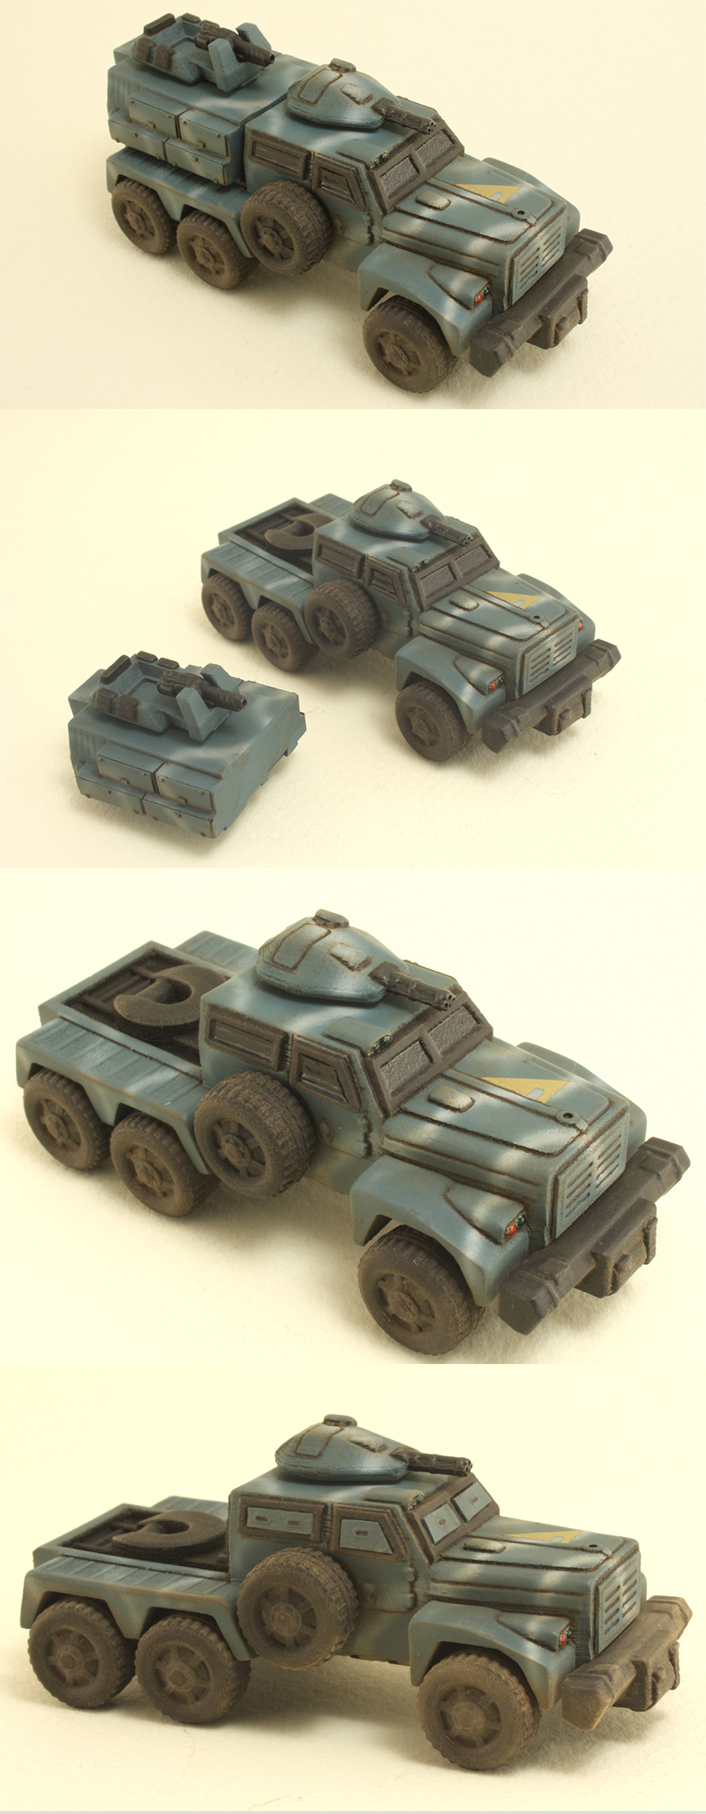 15mm Sci-Fi Resin Vehicles-Chargers-Wheeled-Hover-Tracked-Unpainted Resin Kits 